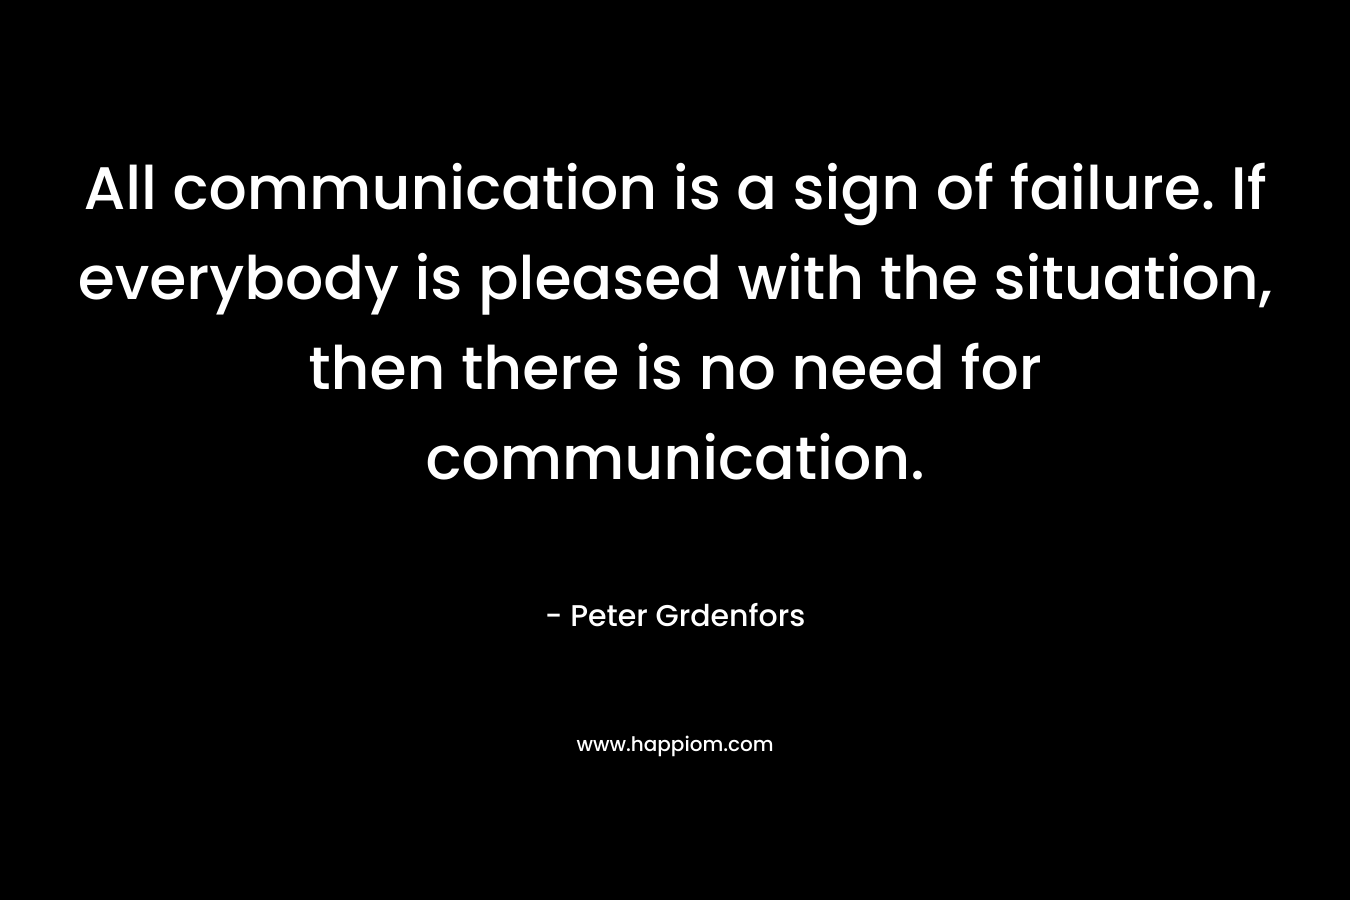 All communication is a sign of failure. If everybody is pleased with the situation, then there is no need for communication.